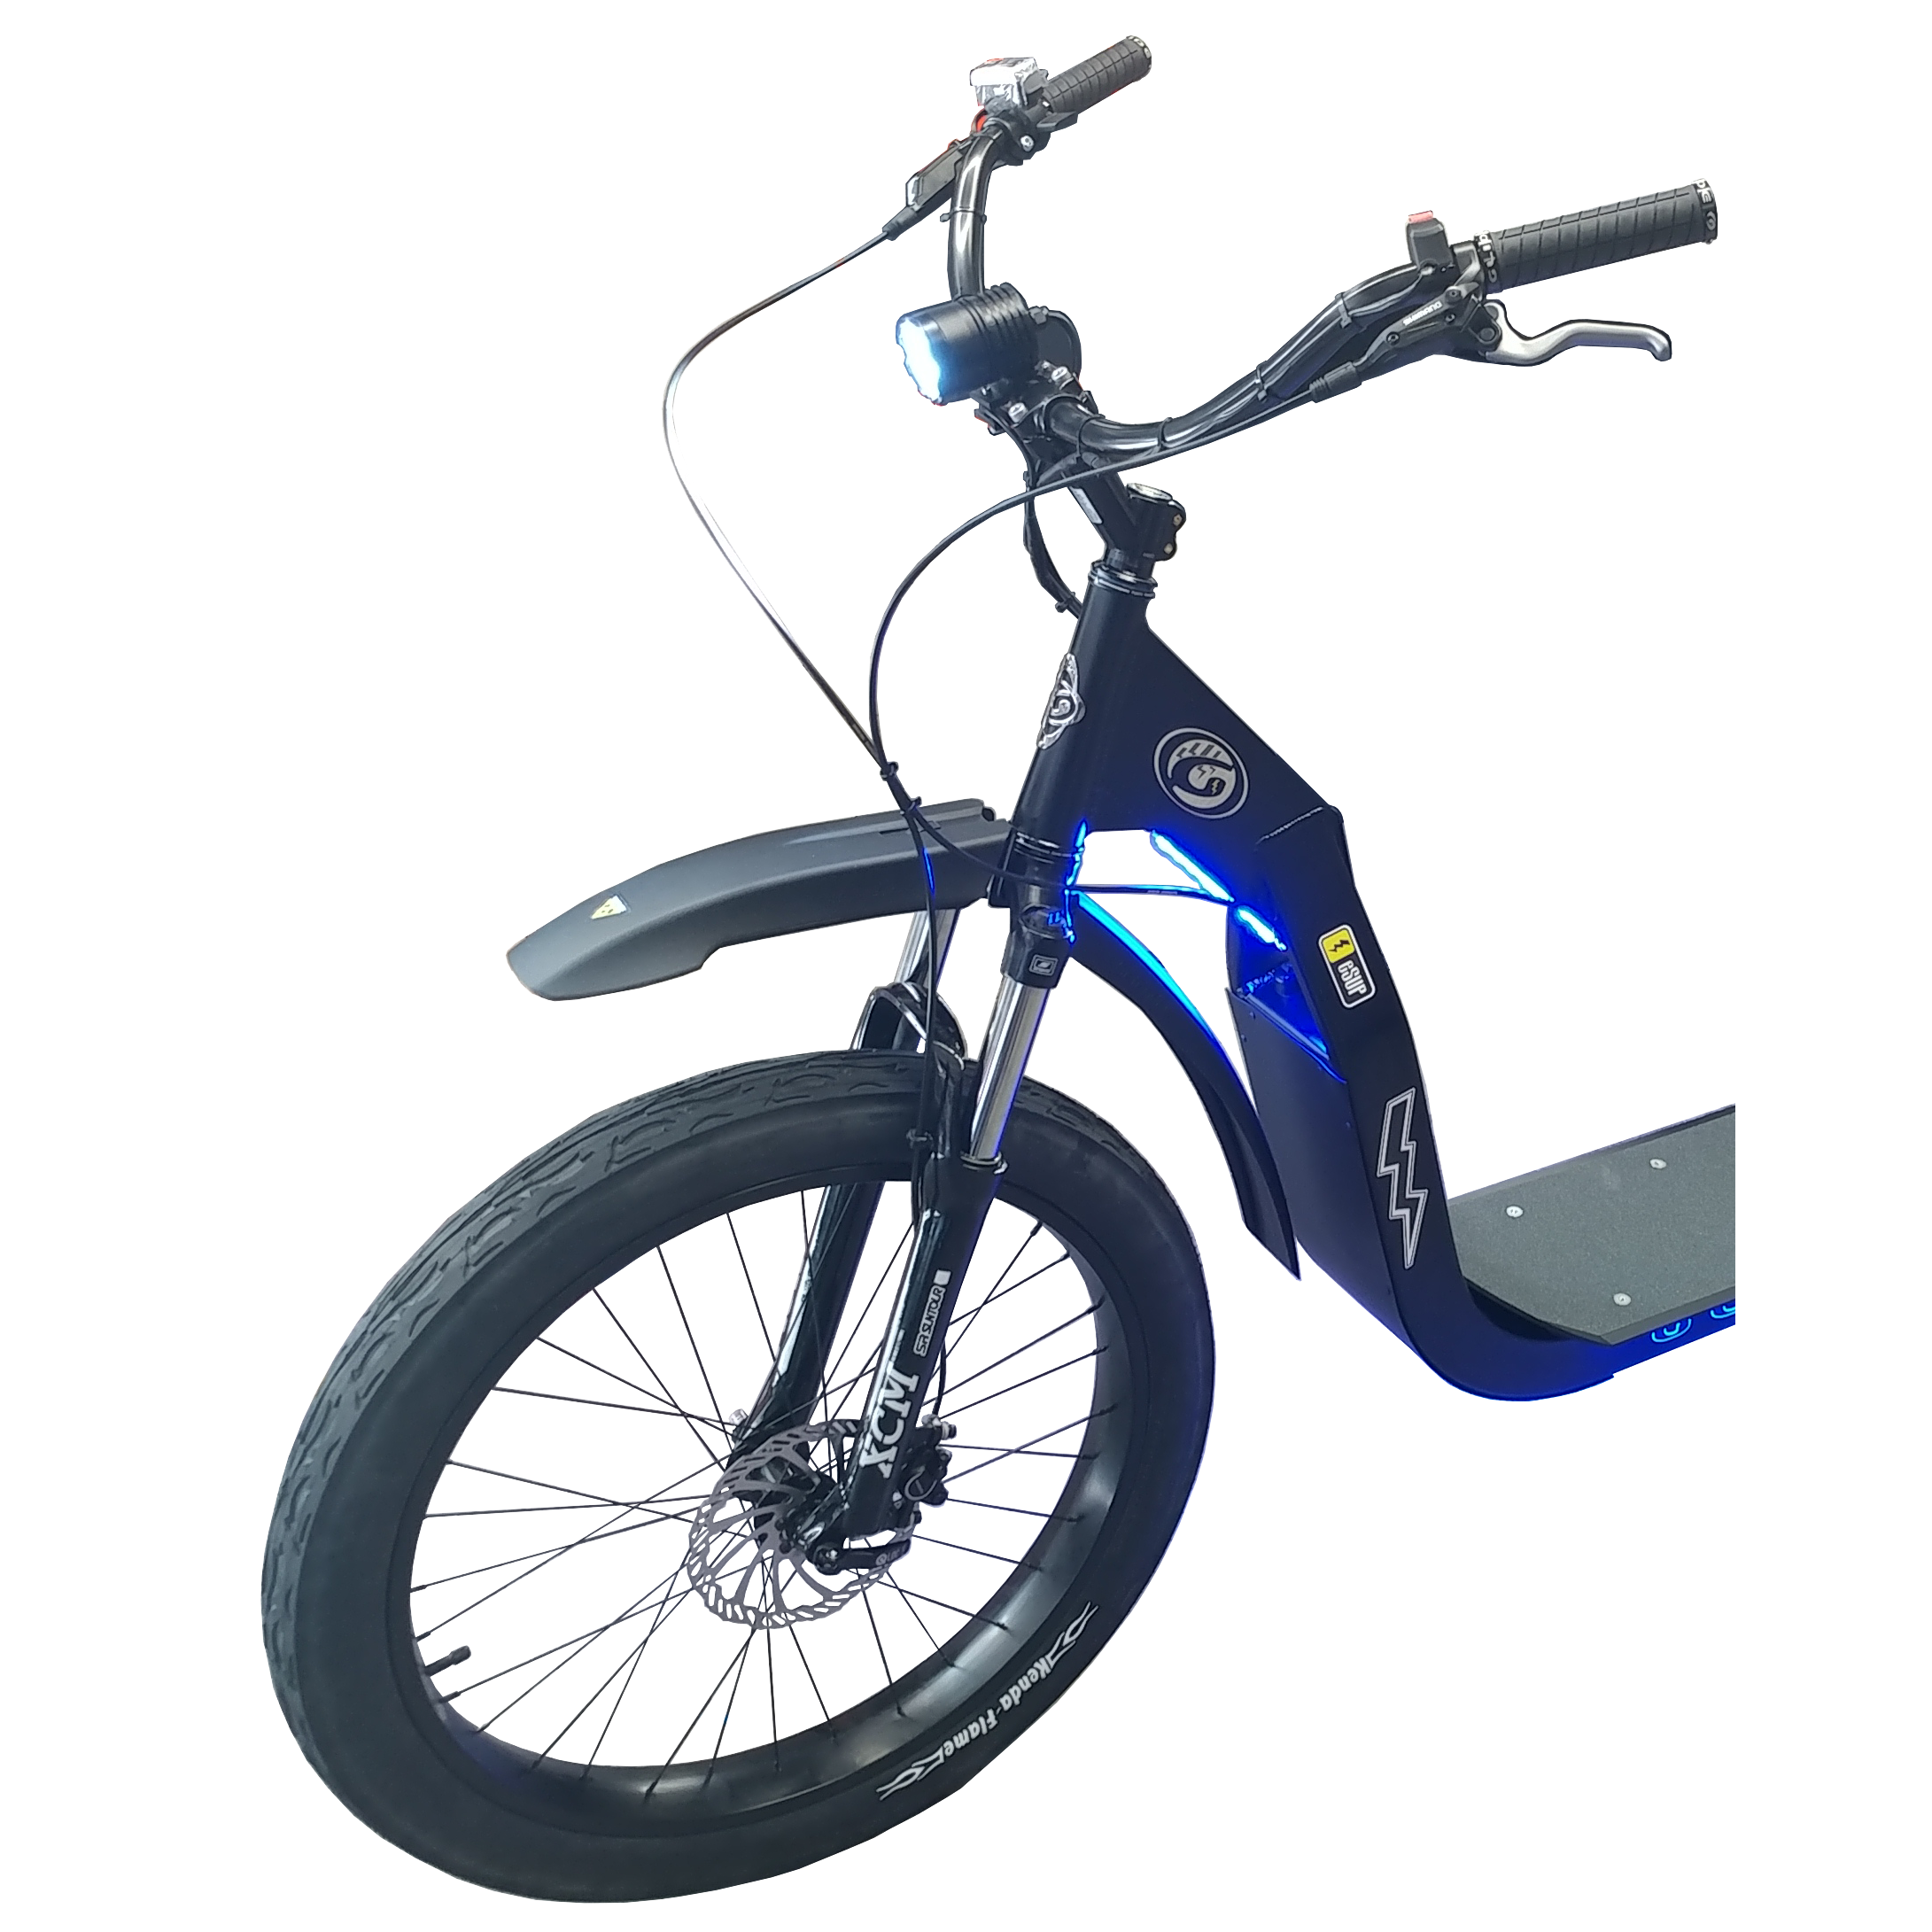 https://cdn.shopifycdn.net/s/files/1/0273/7691/0433/products/glide-cruisers-raptor-48v-1000-watt-fat-tire-electric-scooter-f1-15440466542689.png?v=1637344150